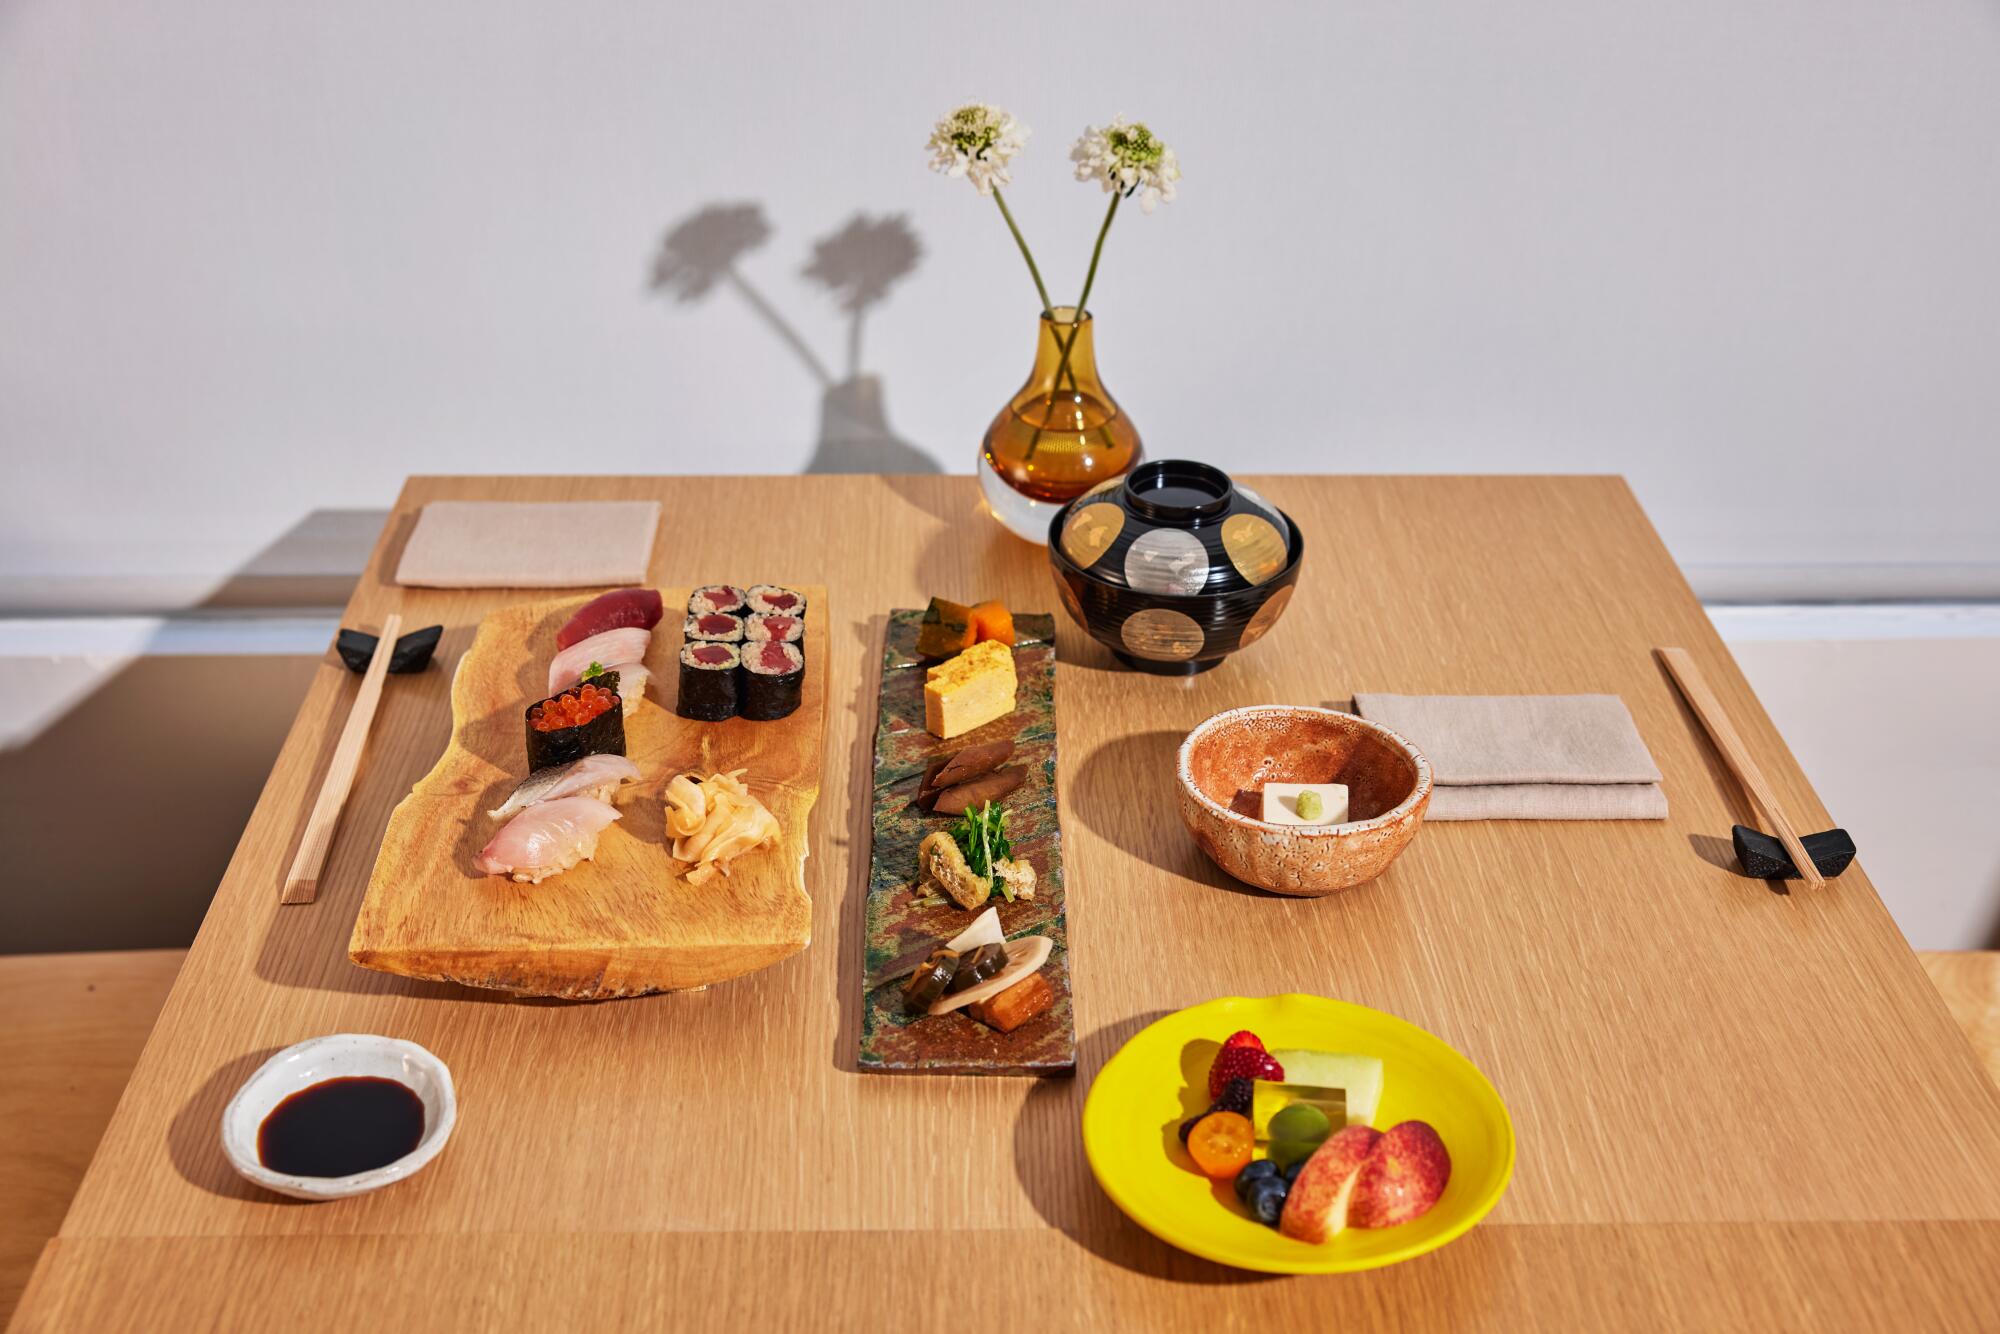 Tablescape of omakase from Morihiro resturant in Atwater Village, California.